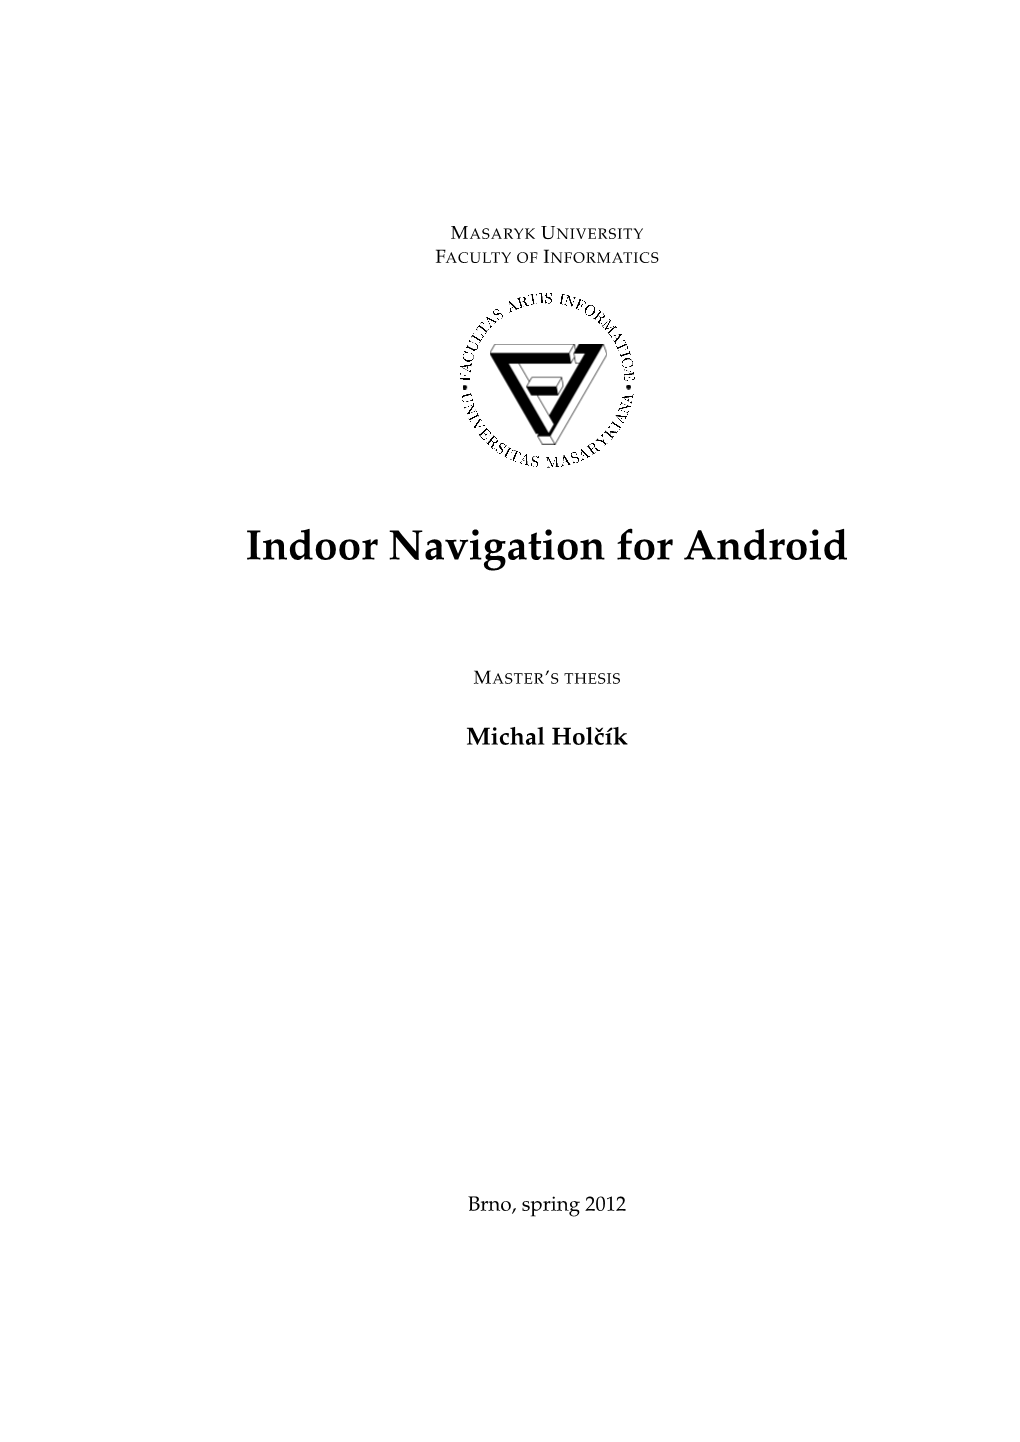 Indoor Navigation for Android